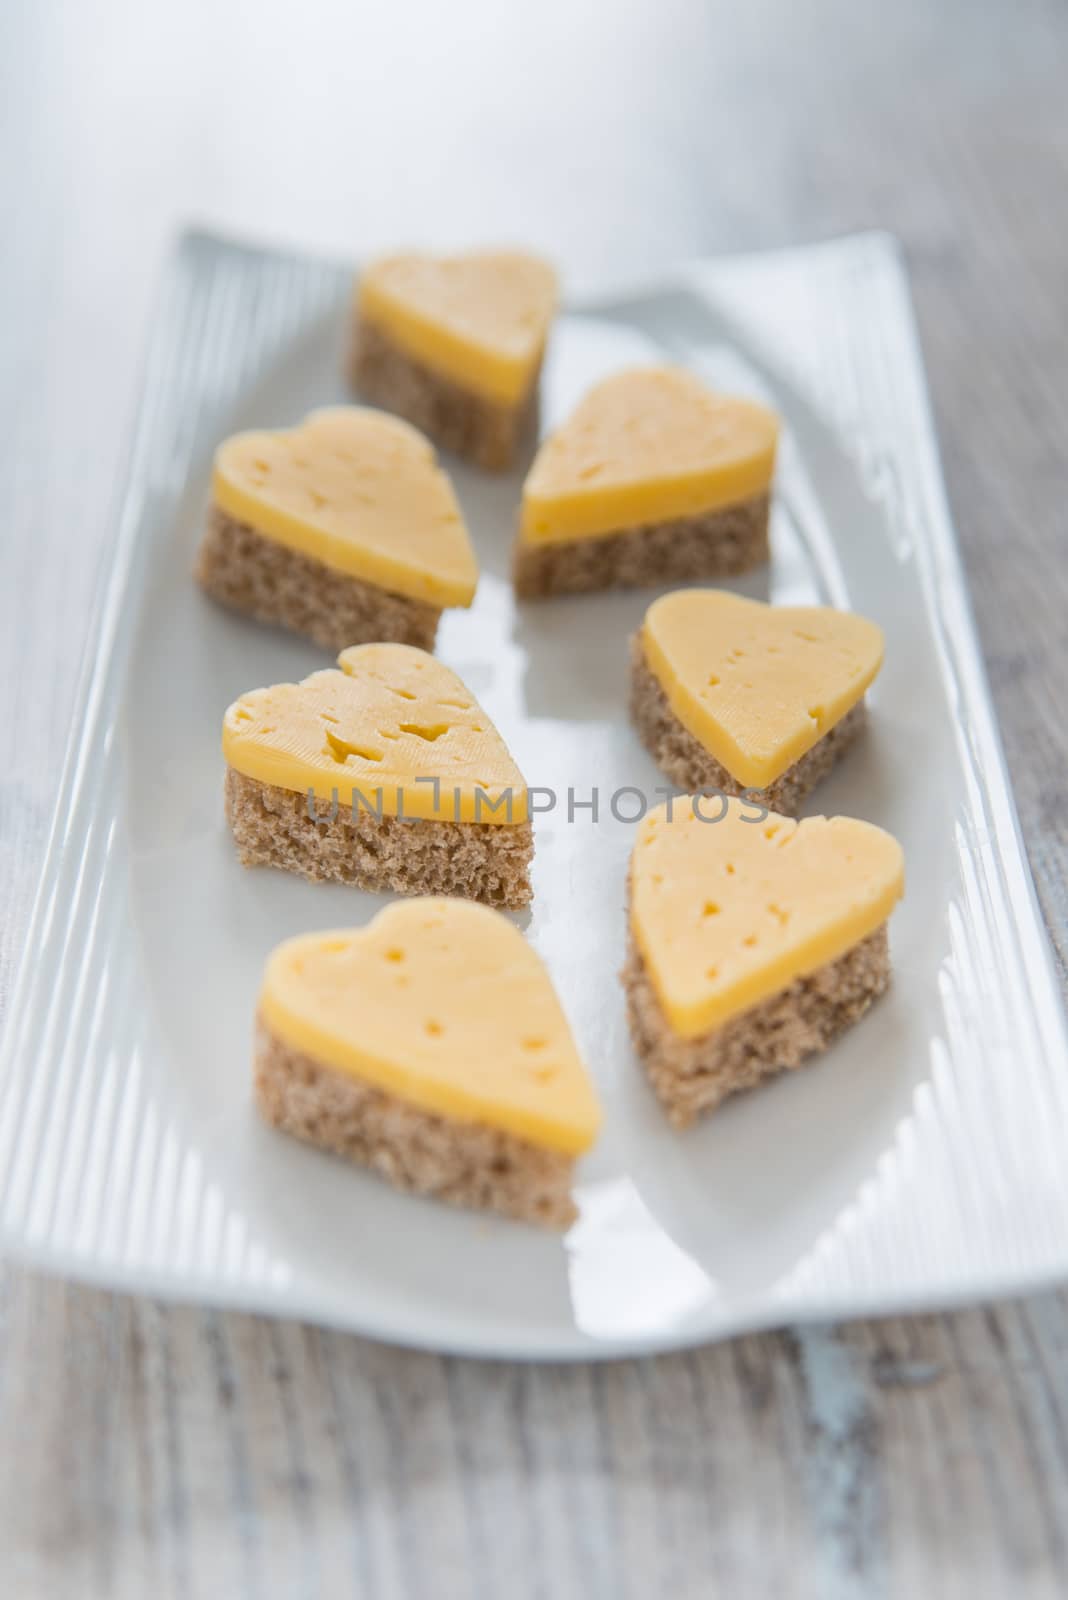 Heart shaped cheese sandwiches by Linaga